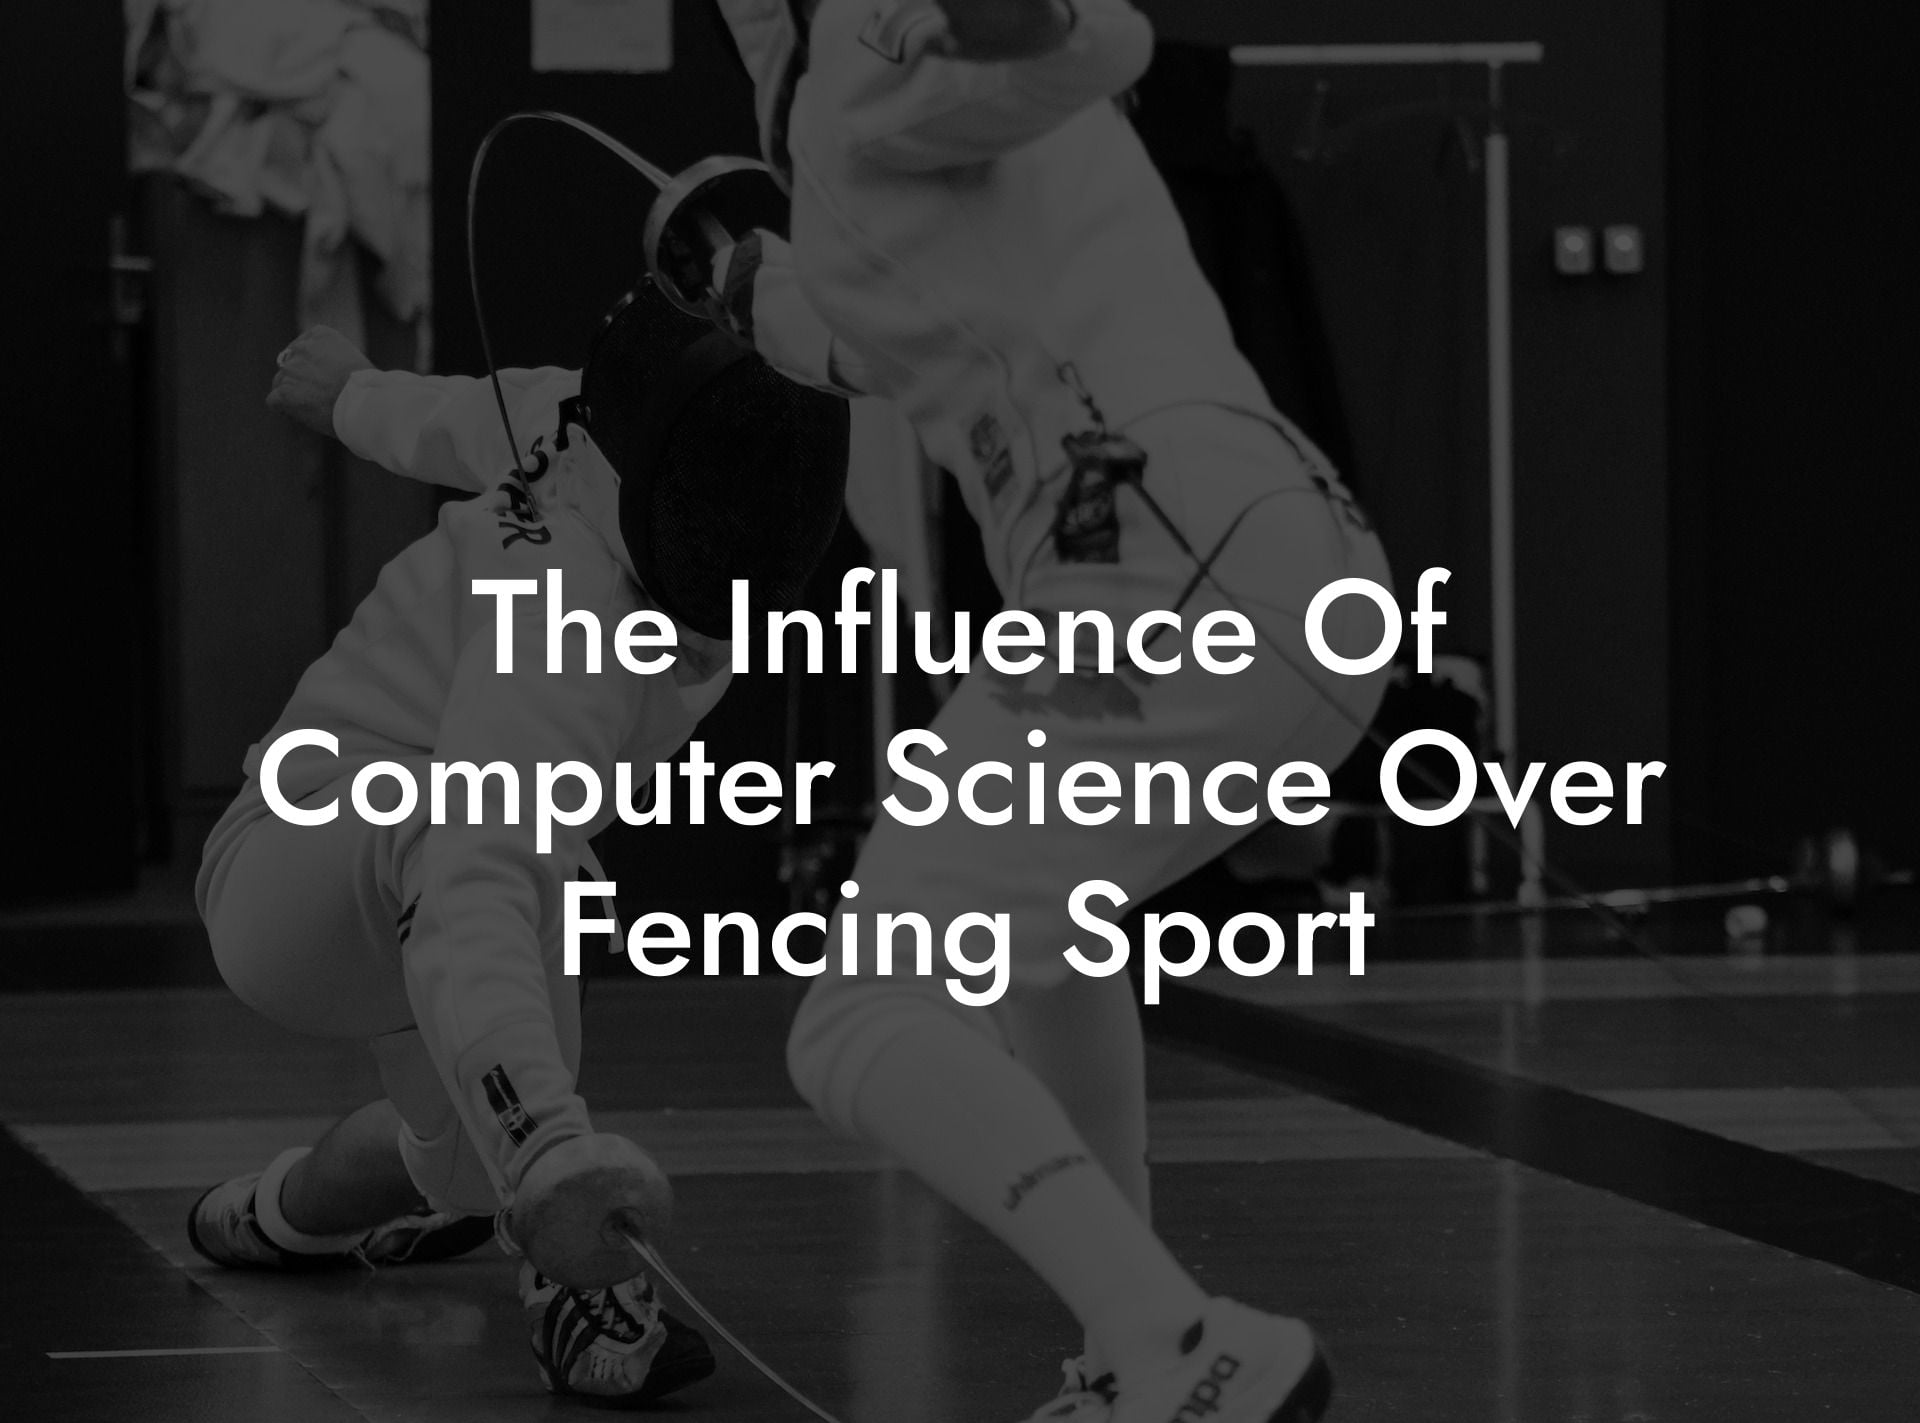 The Influence Of Computer Science Over Fencing Sport